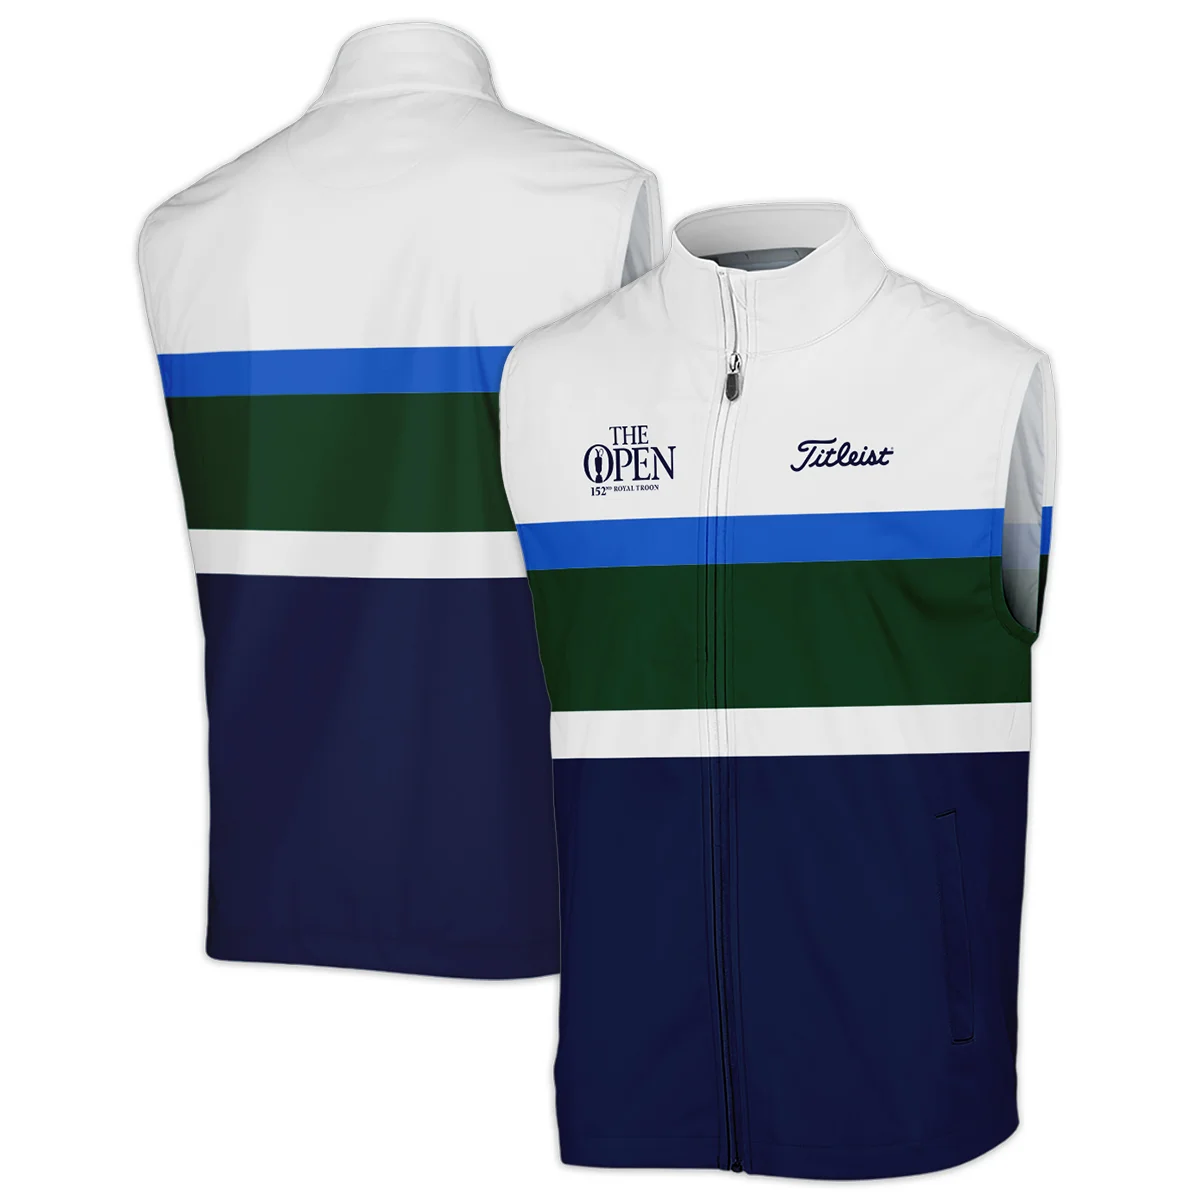 White Blue Green Background Titleist 152nd Open Championship Hoodie Shirt All Over Prints HOTOP270624A01TLHD